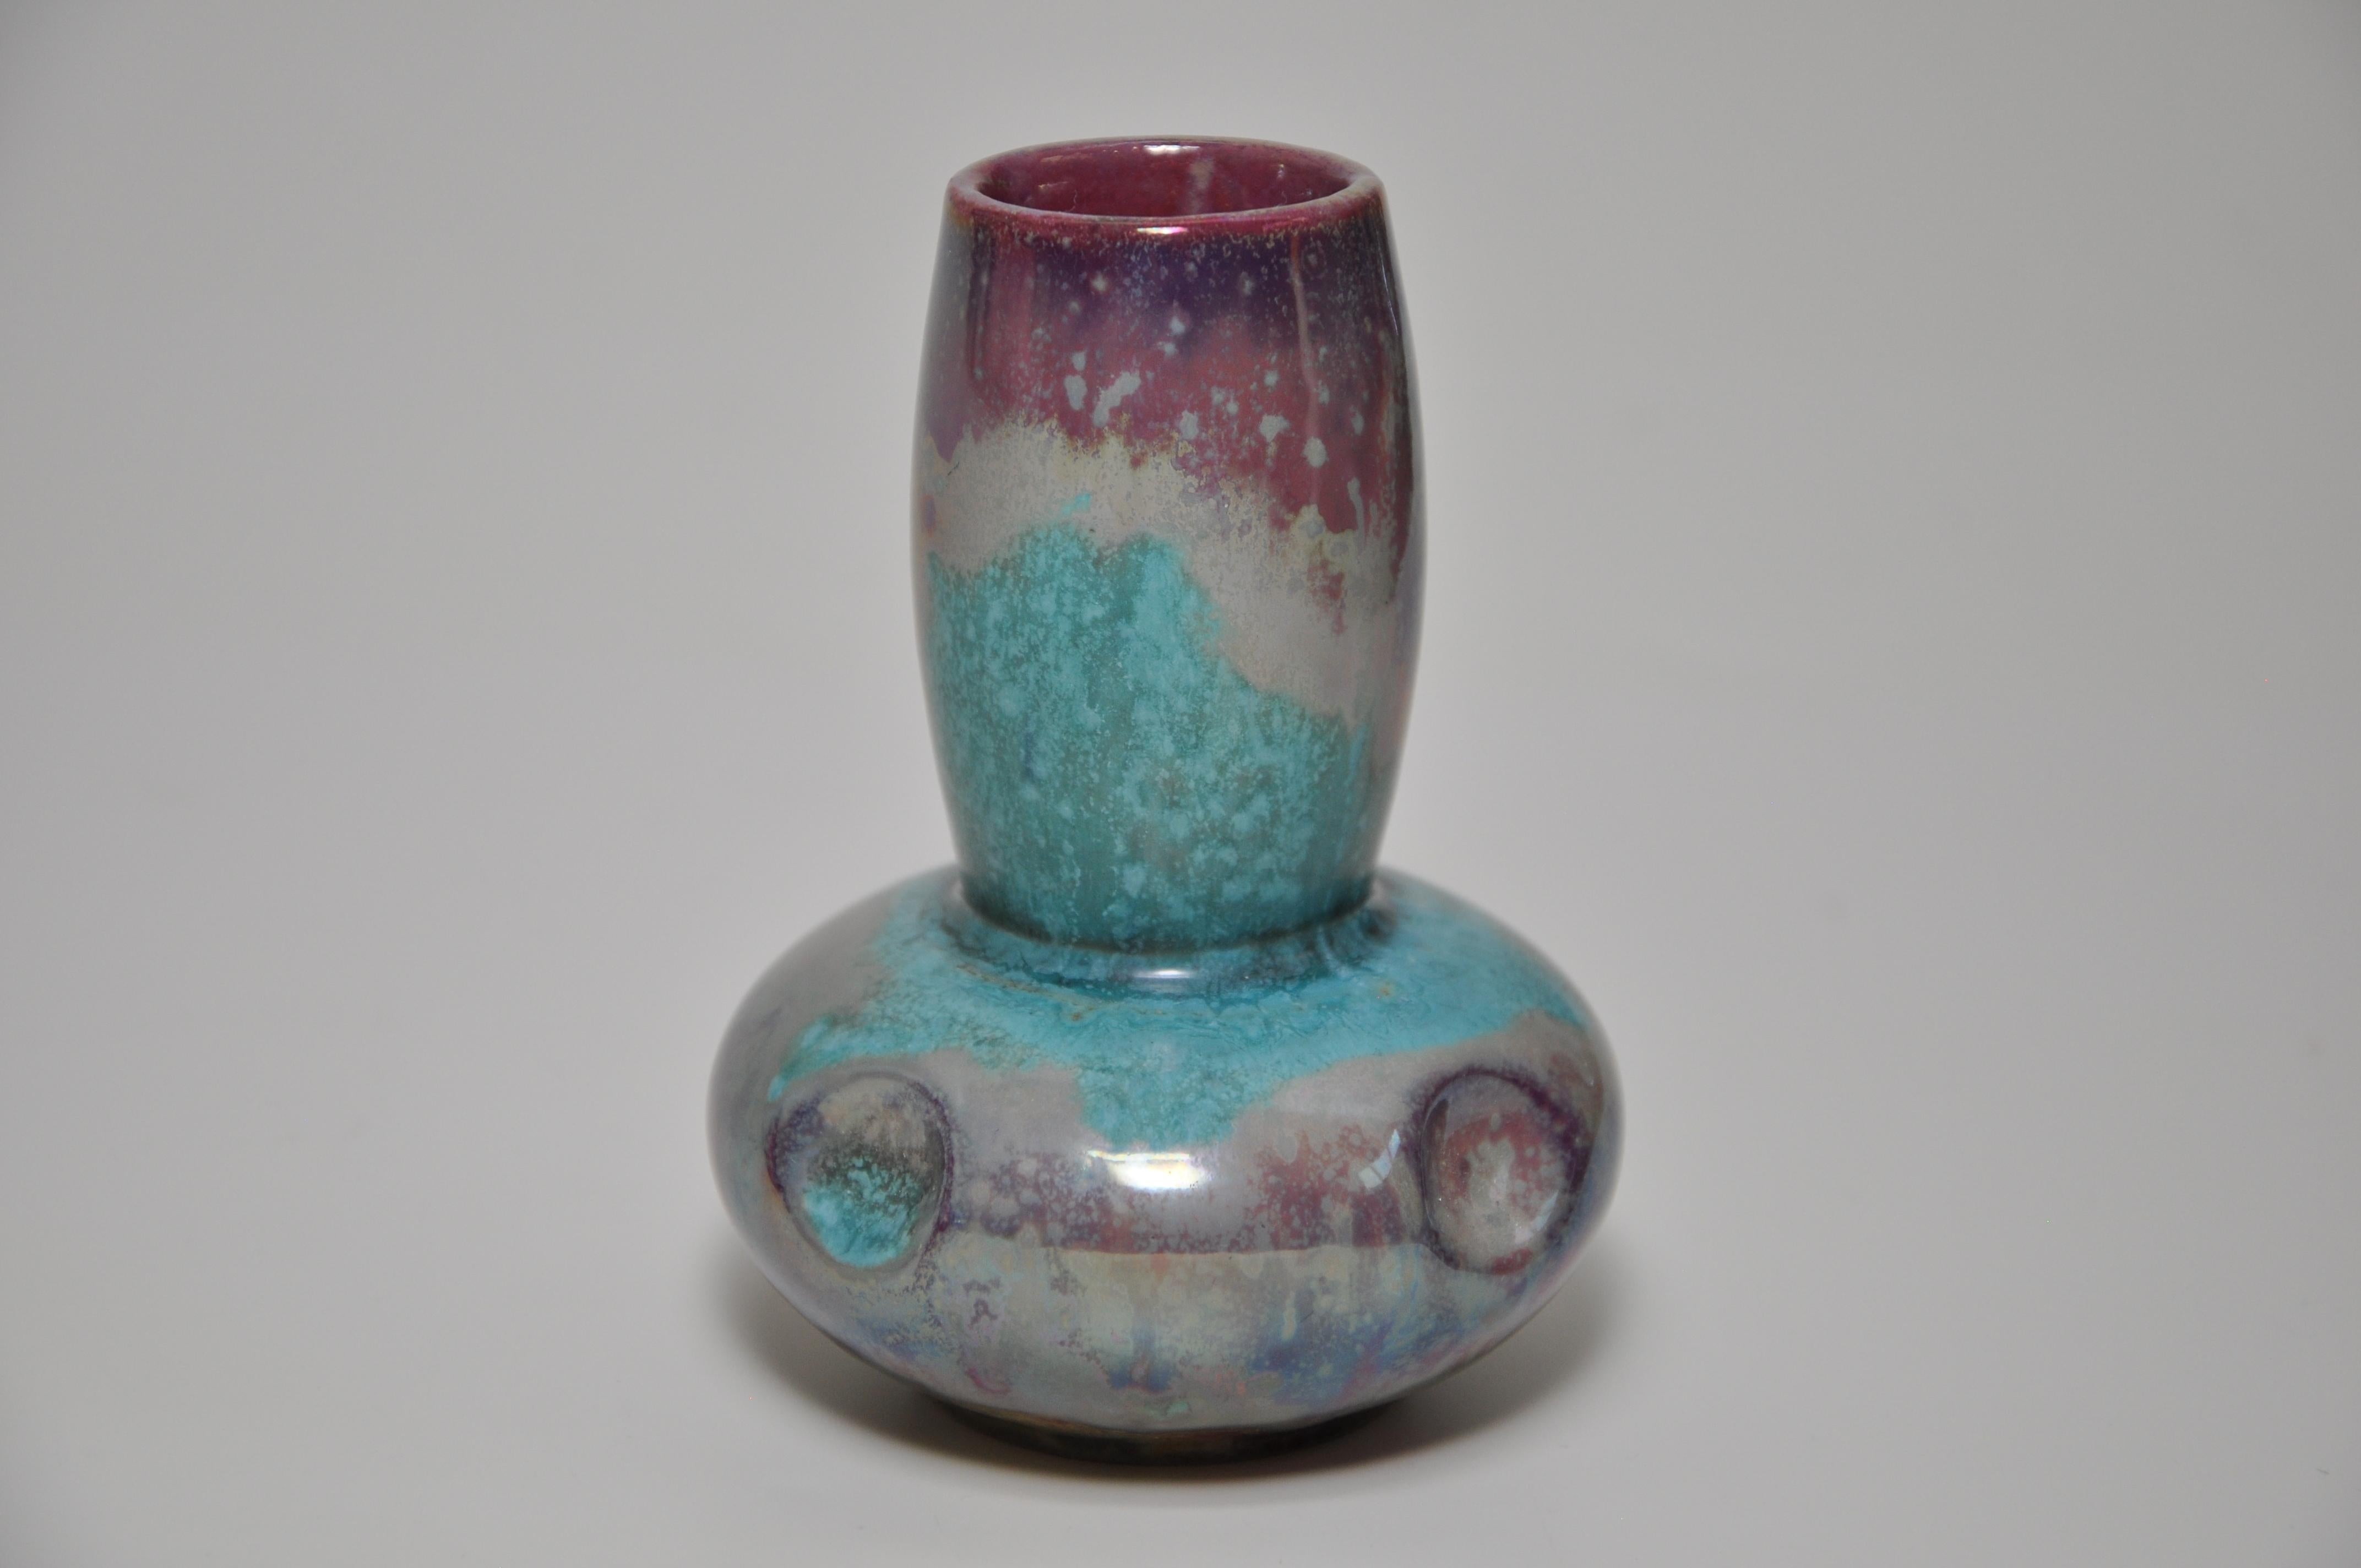 20th Century French Art Nouveau Turquoise and Purple Ceramic Pot by Alphonse Cytere of Ramber For Sale